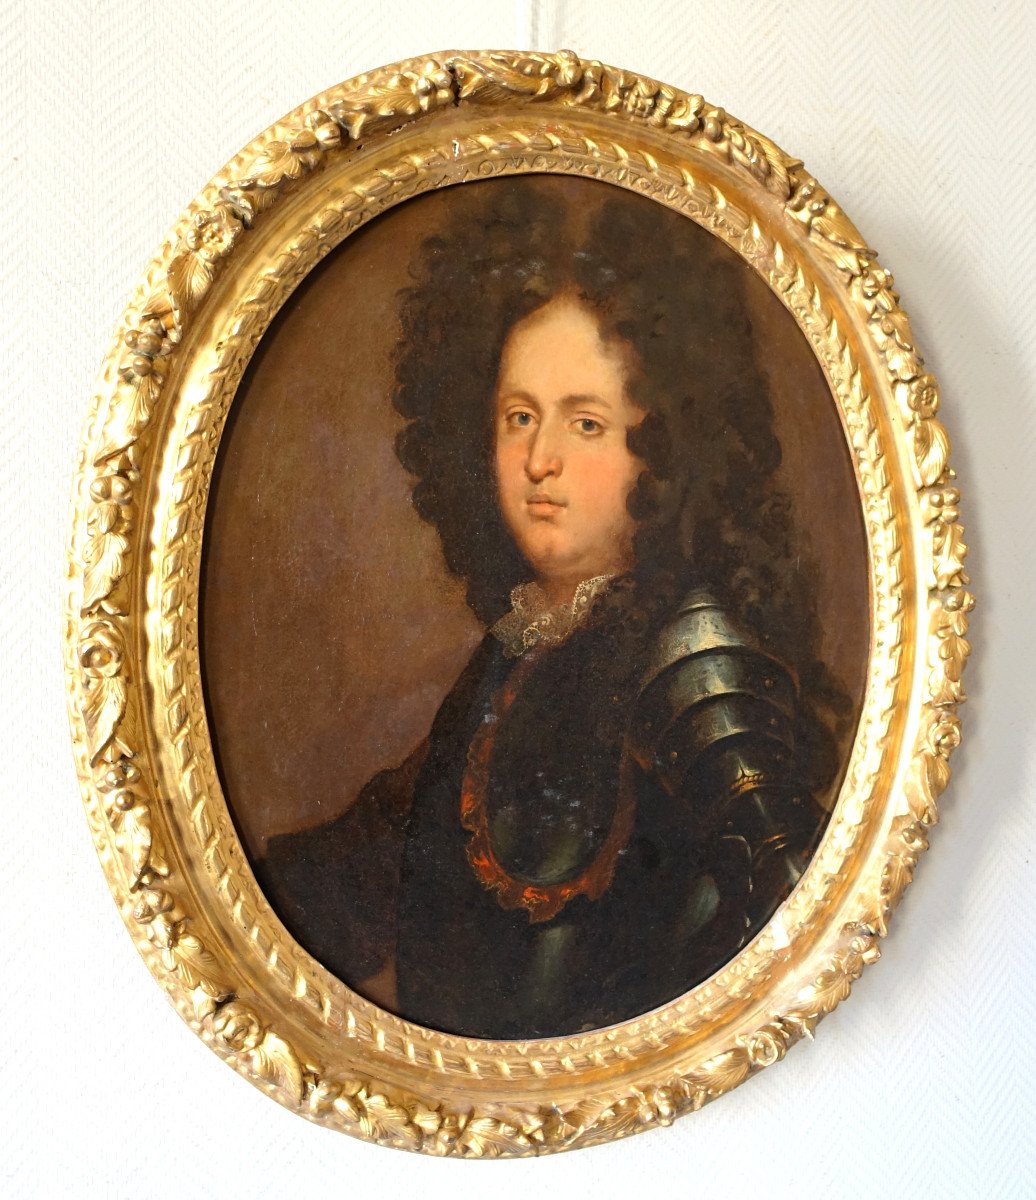 French School From The 17th Century, Portrait Of An Aristocrat Officer In Louis XIV Period Armor-photo-1